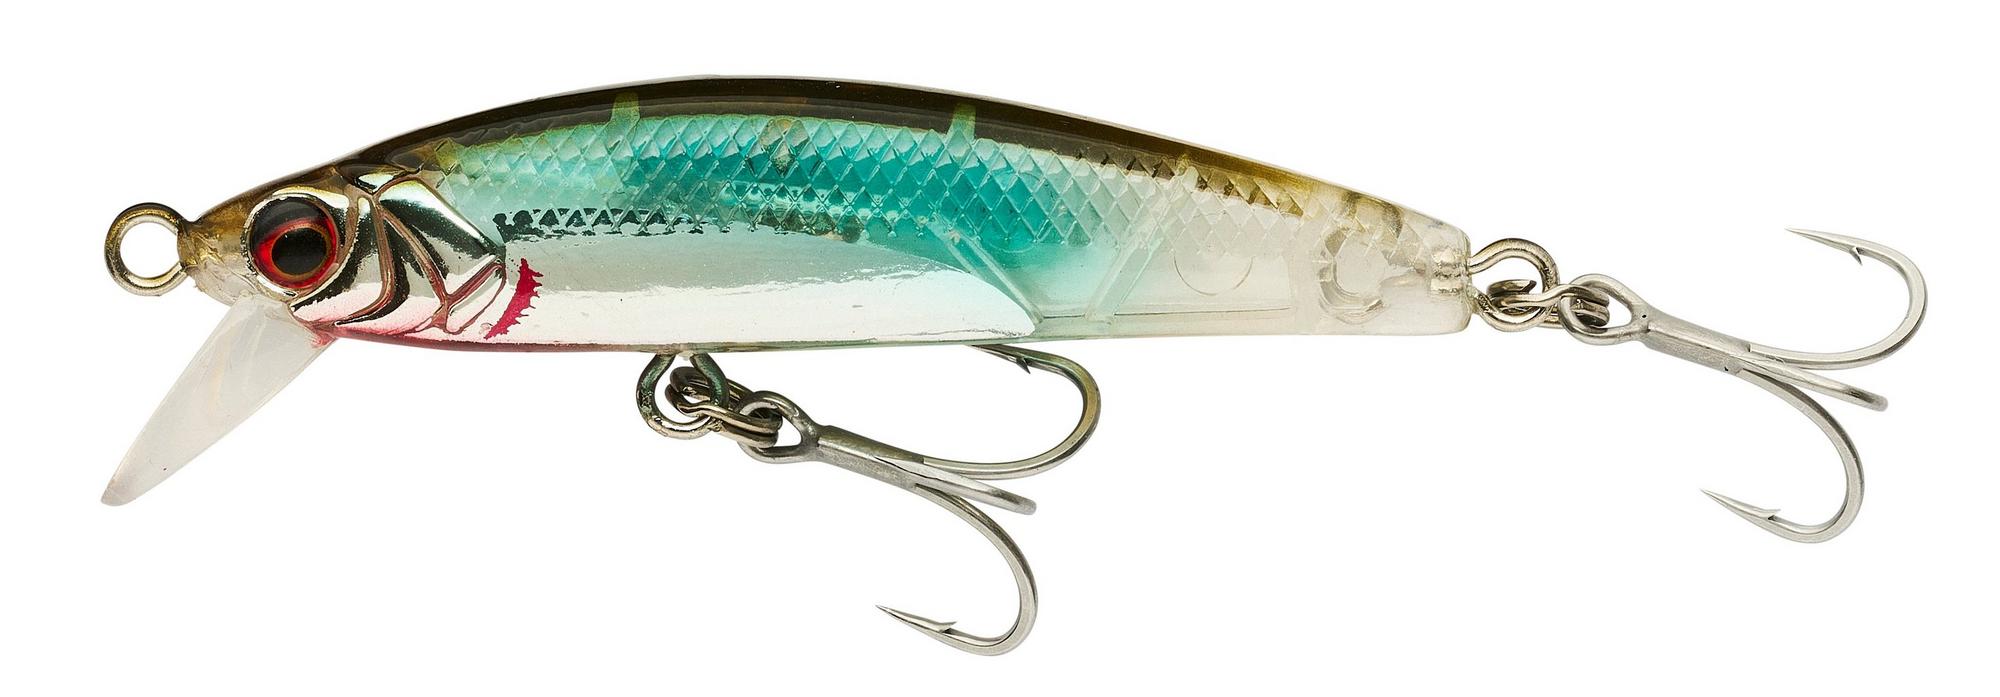 Savage Gear Gravity Minnow Floating Lure 5cm (3.1g) - Sparky